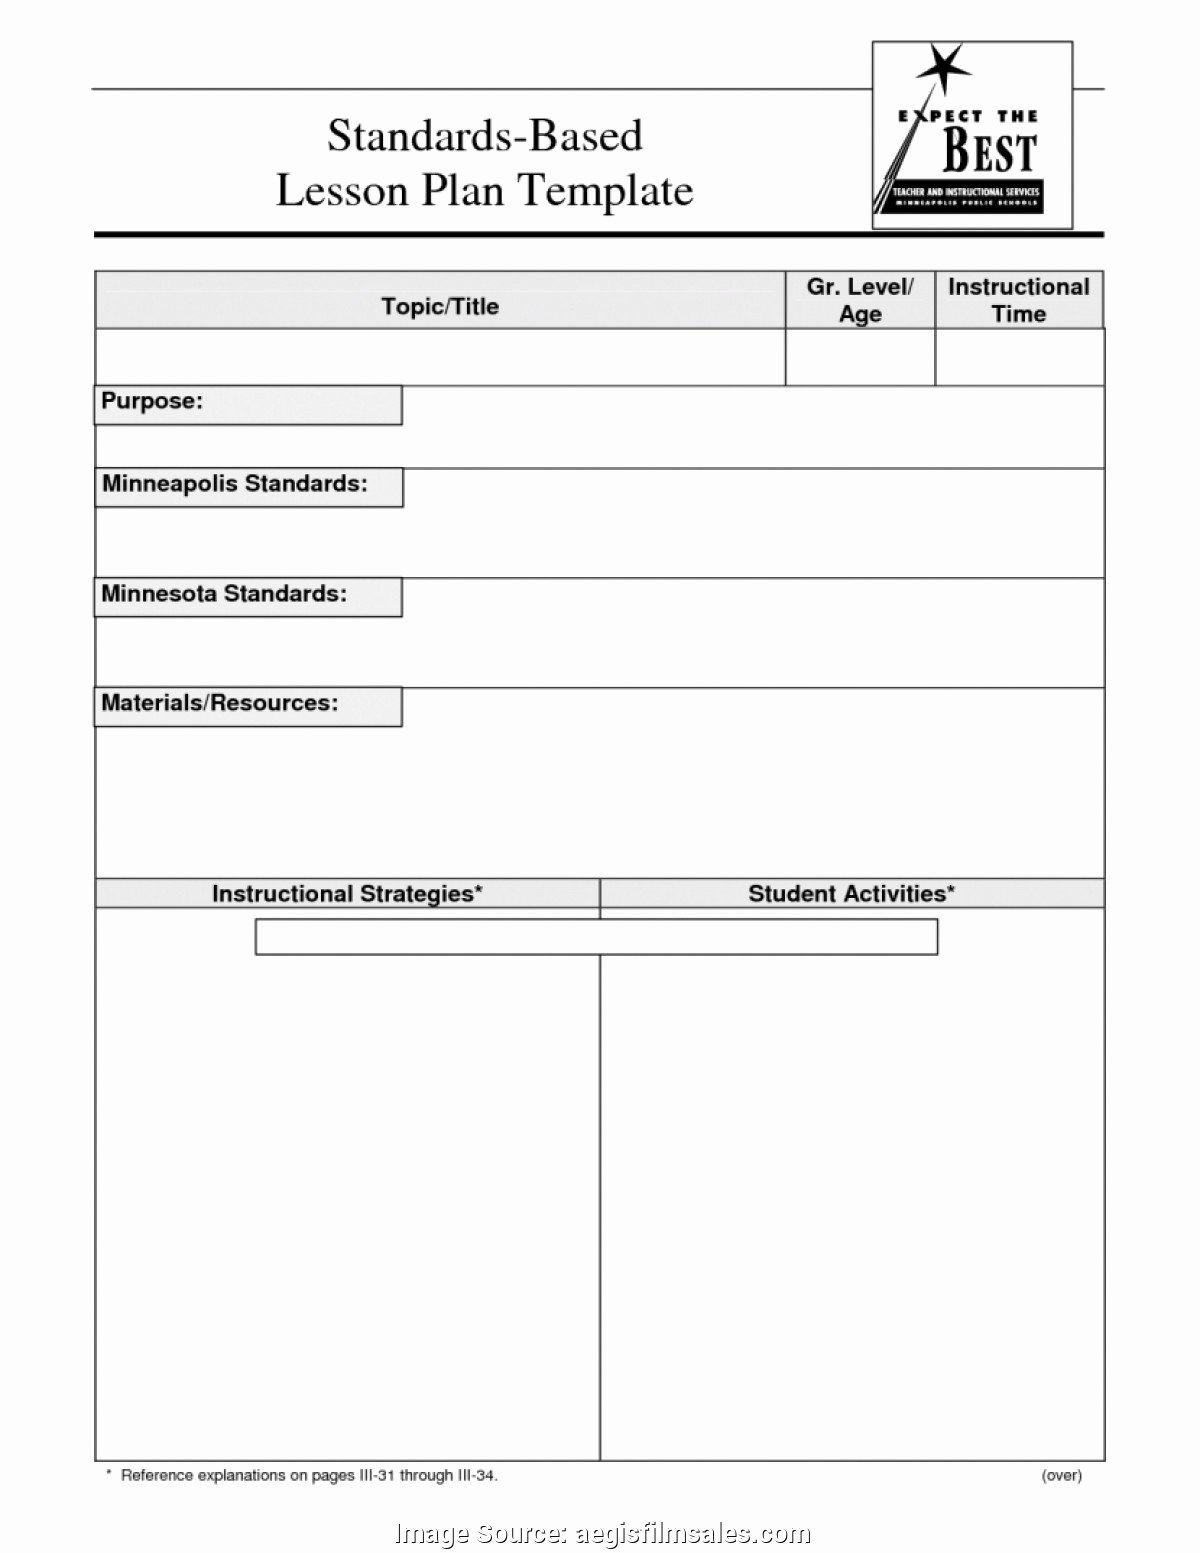 Standards Based Lesson Plan Template Awesome Fresh Standards Based Lesson Plan Template Team Lesson